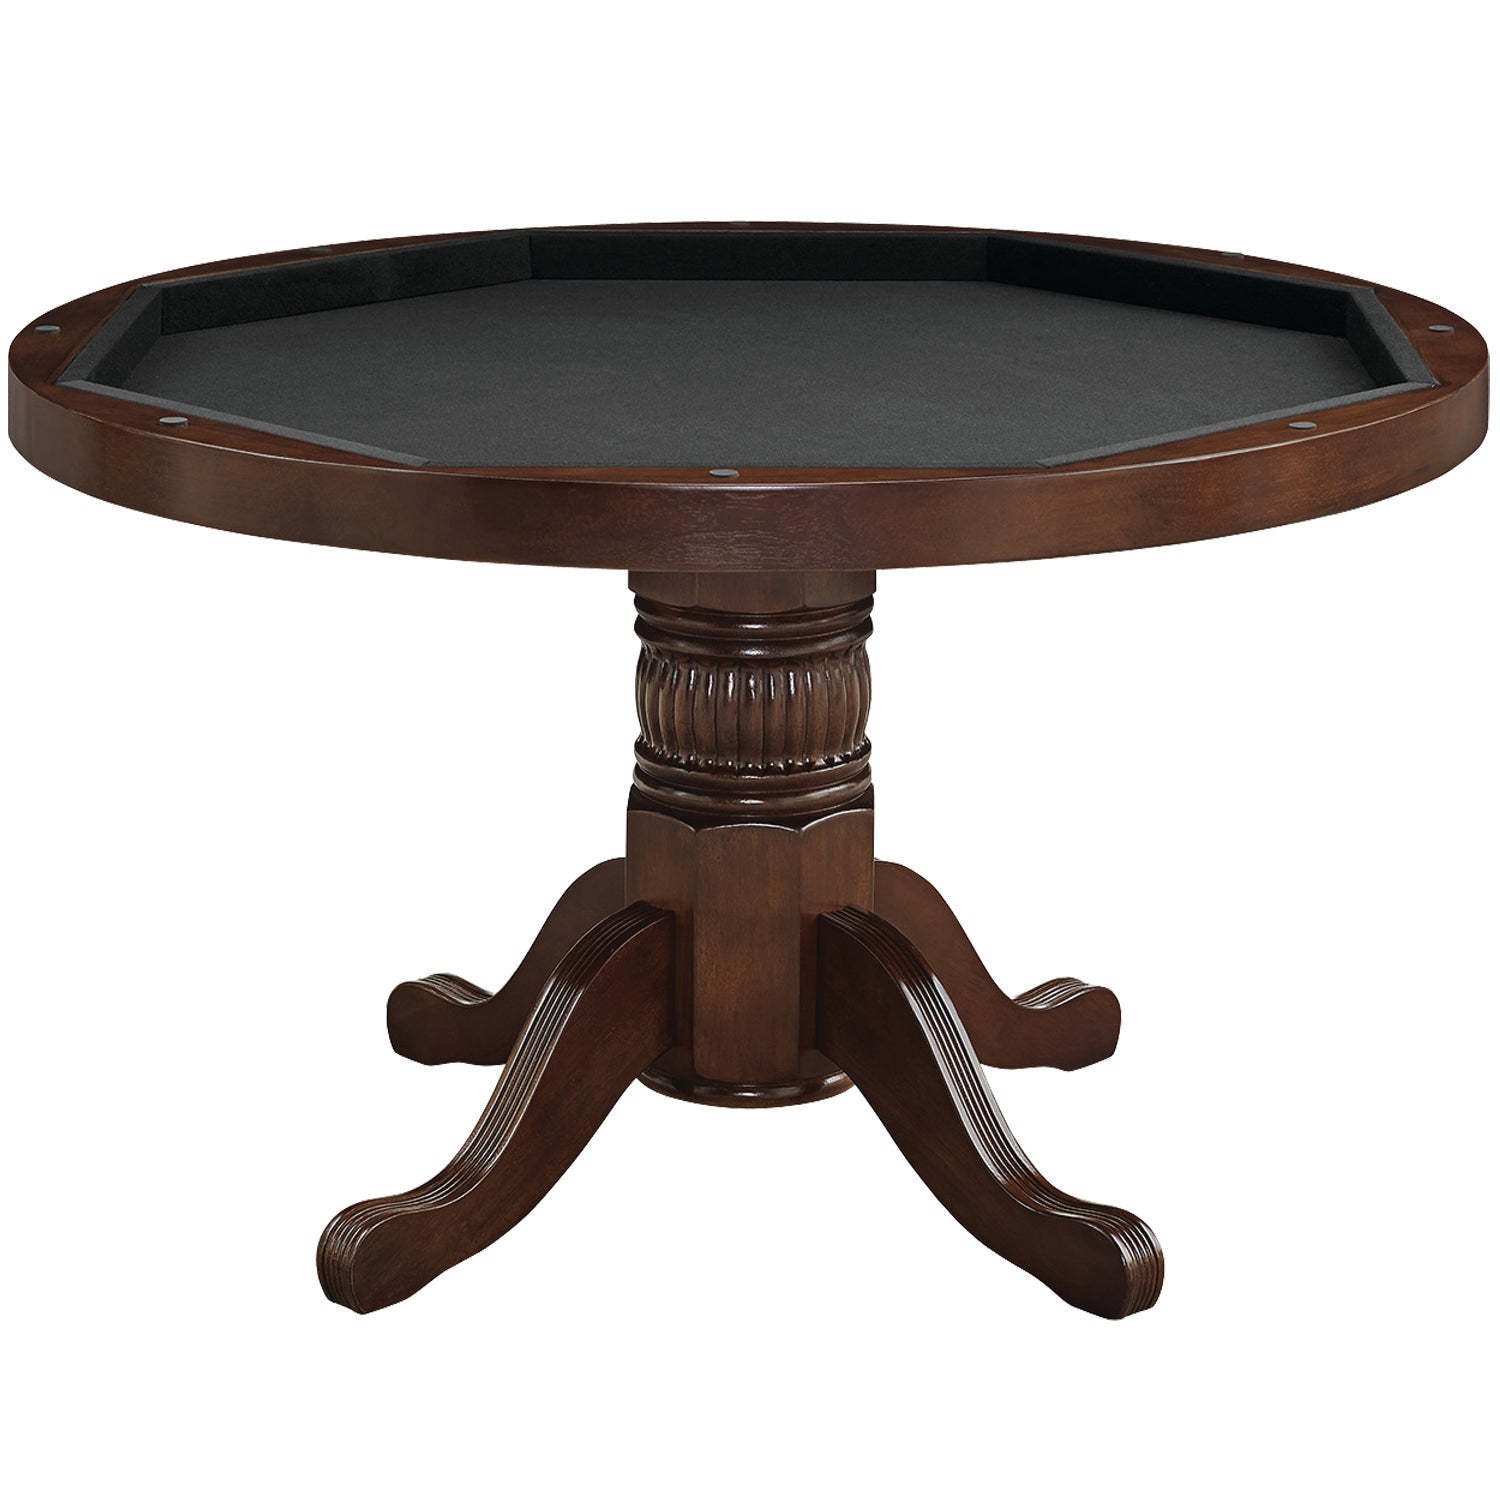 Round convertible game table stoage in a cappuccino finish.